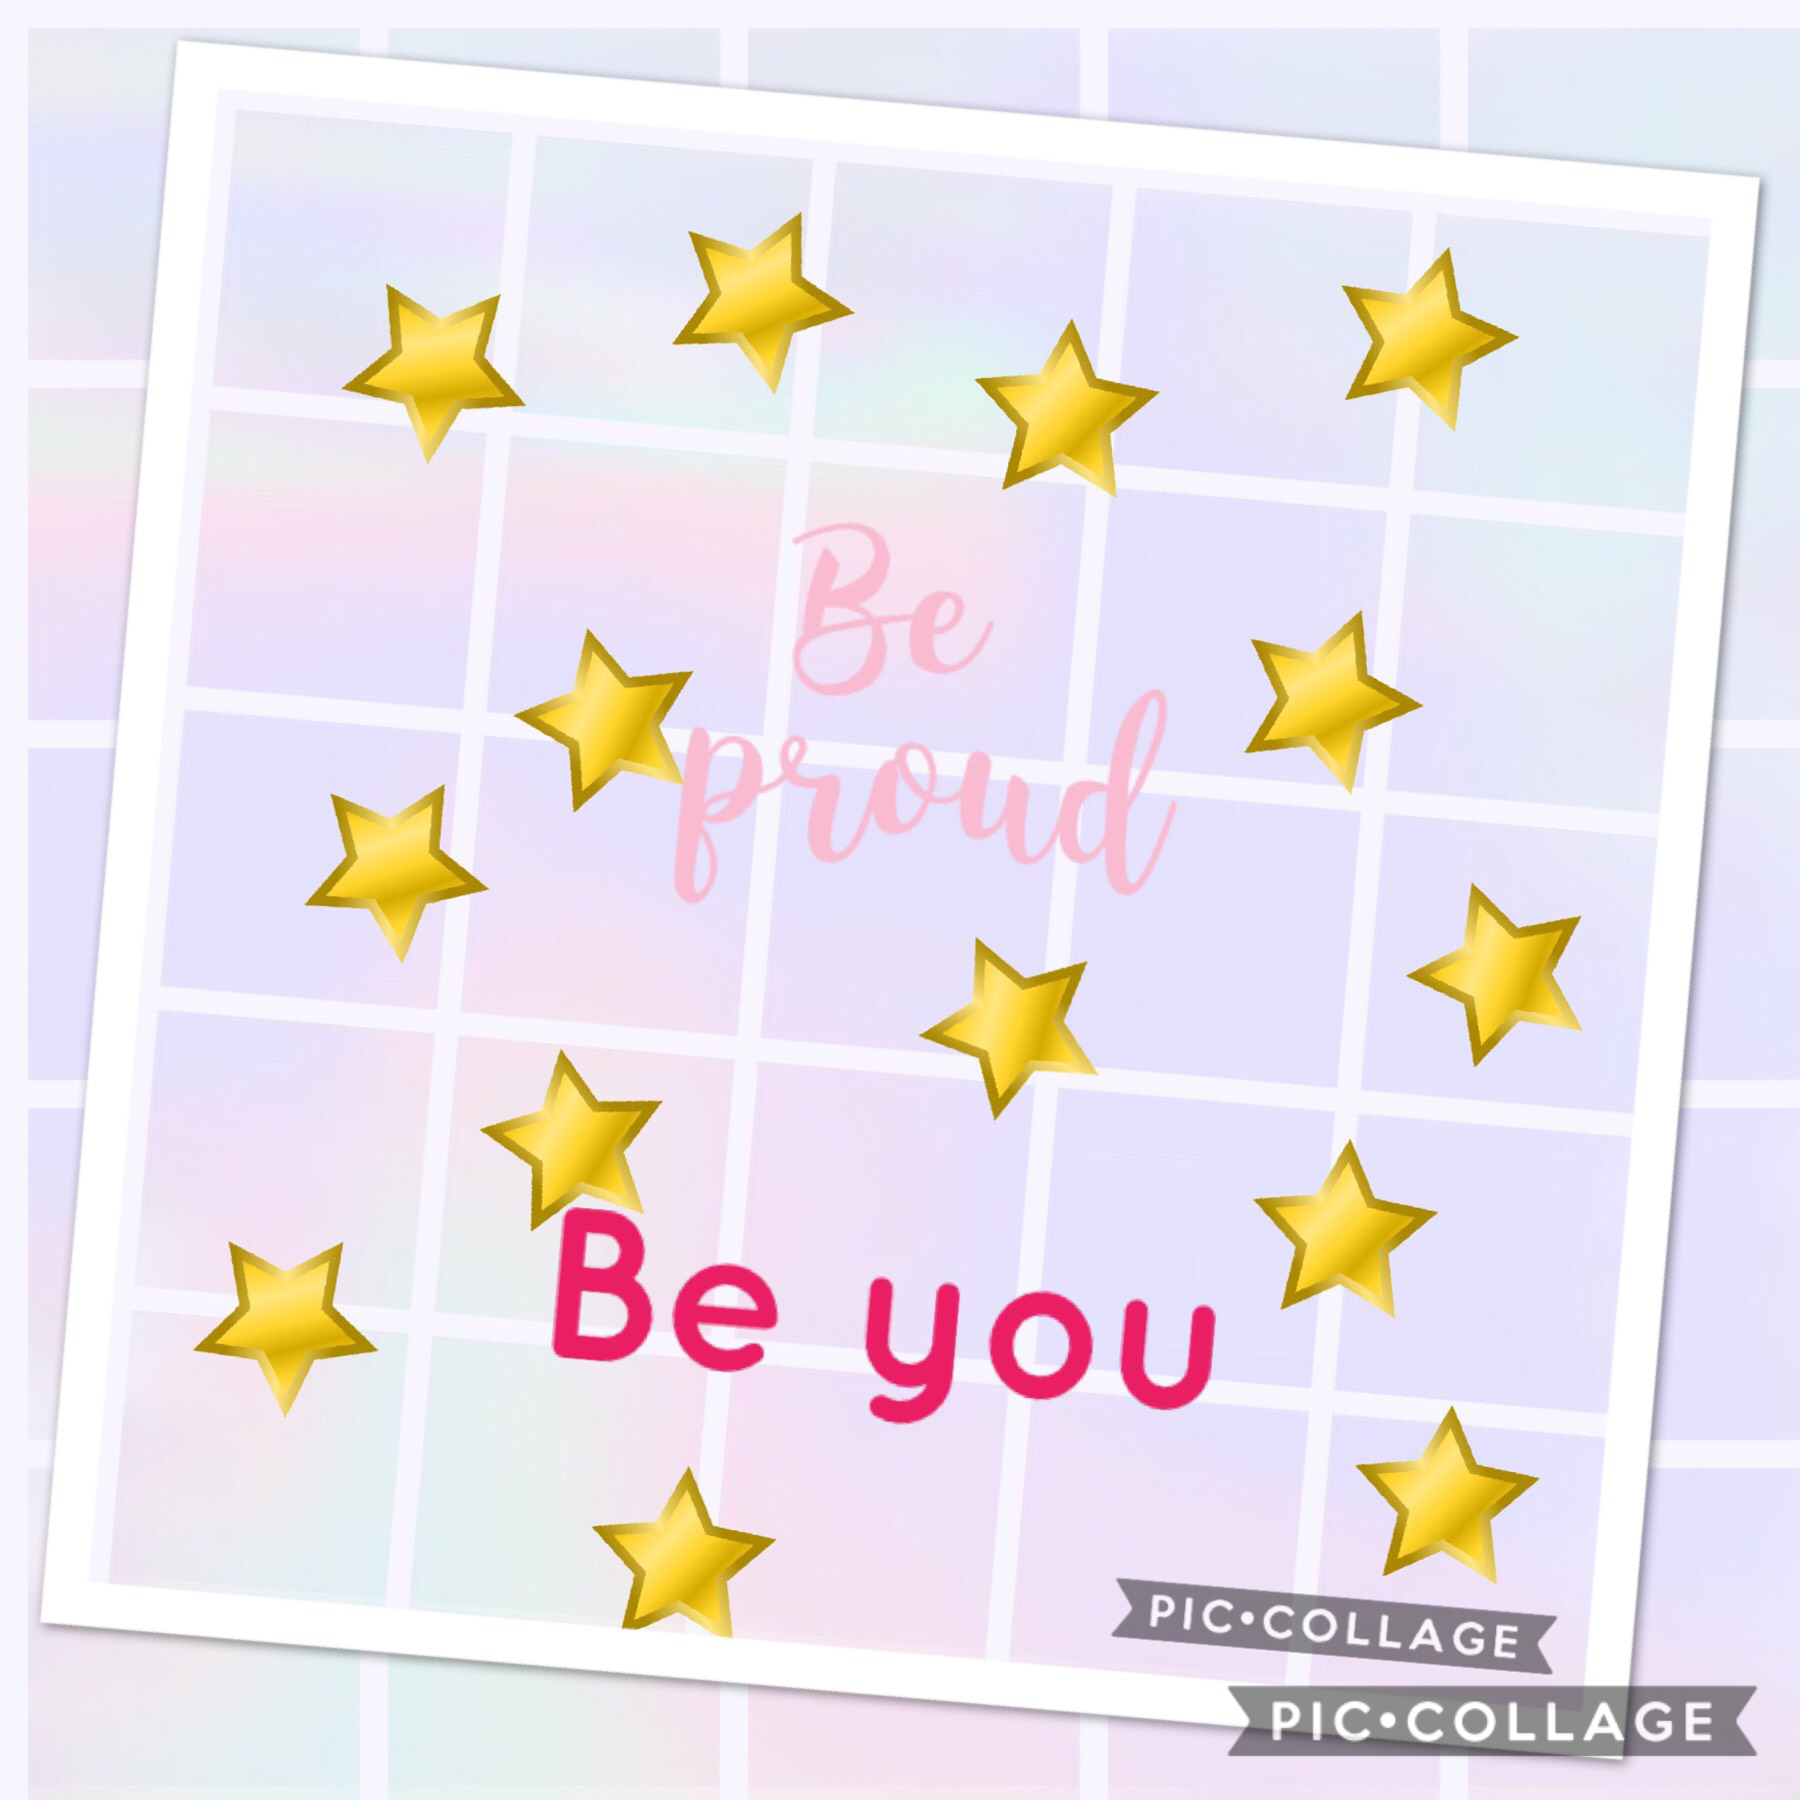 “Be proud, be you”
#be #proud #you #stars #PicCollage